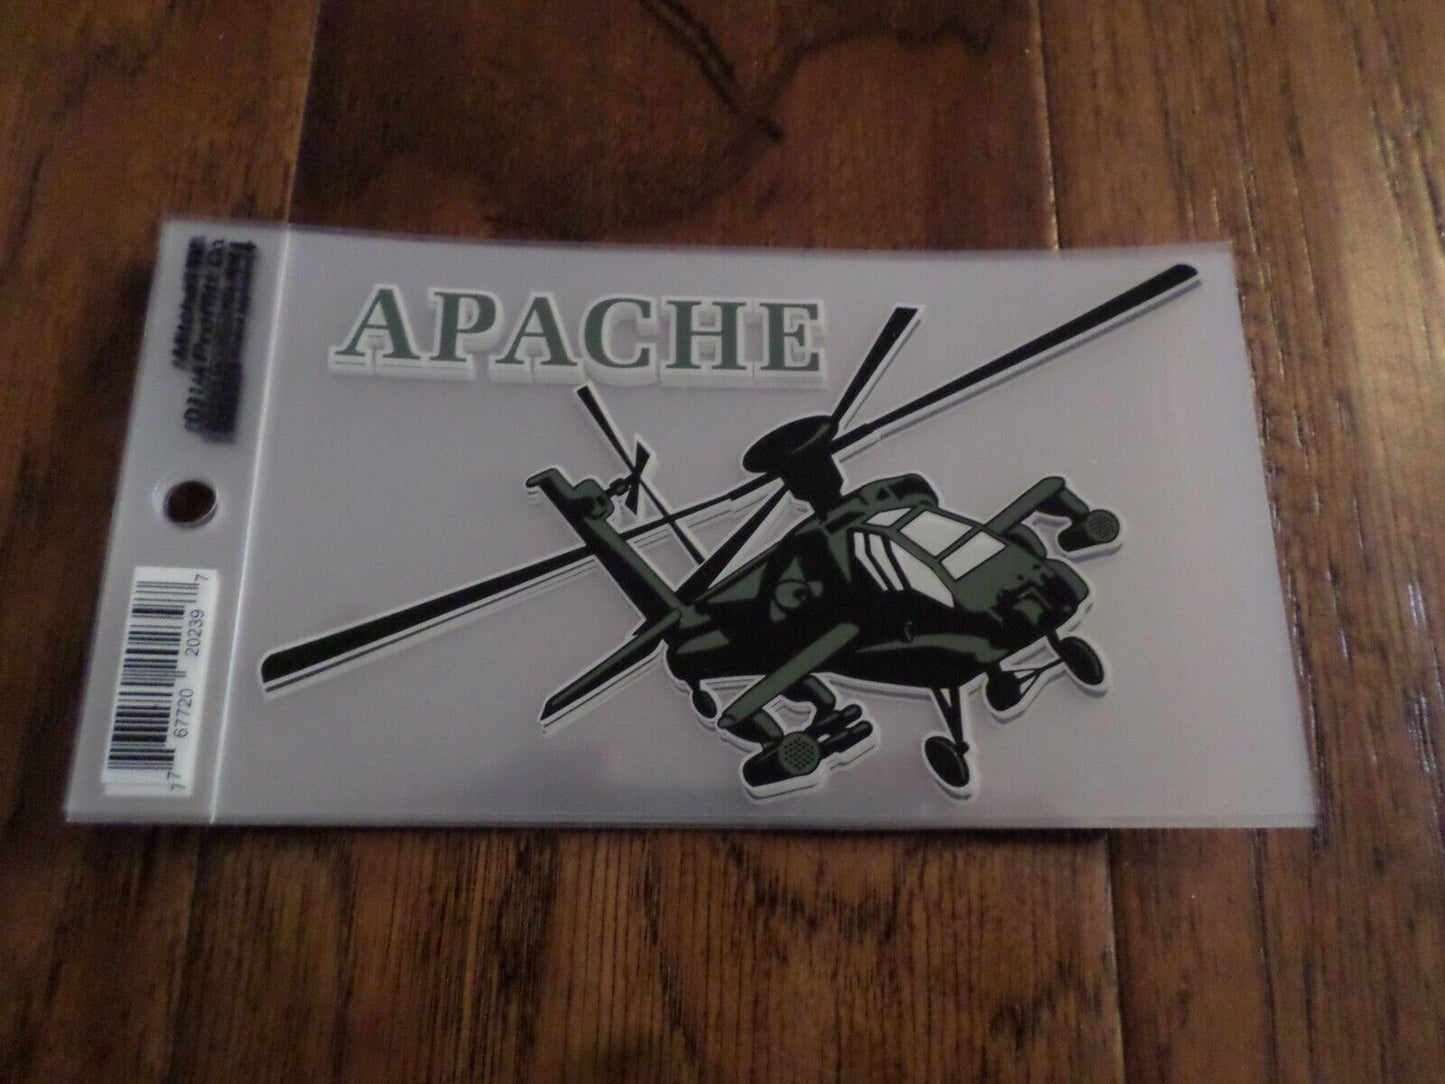 U.S MILITARY ARMY APACHE AIR ASSAULT HELICOPTER WINDOW DECAL BUMPER STICKER